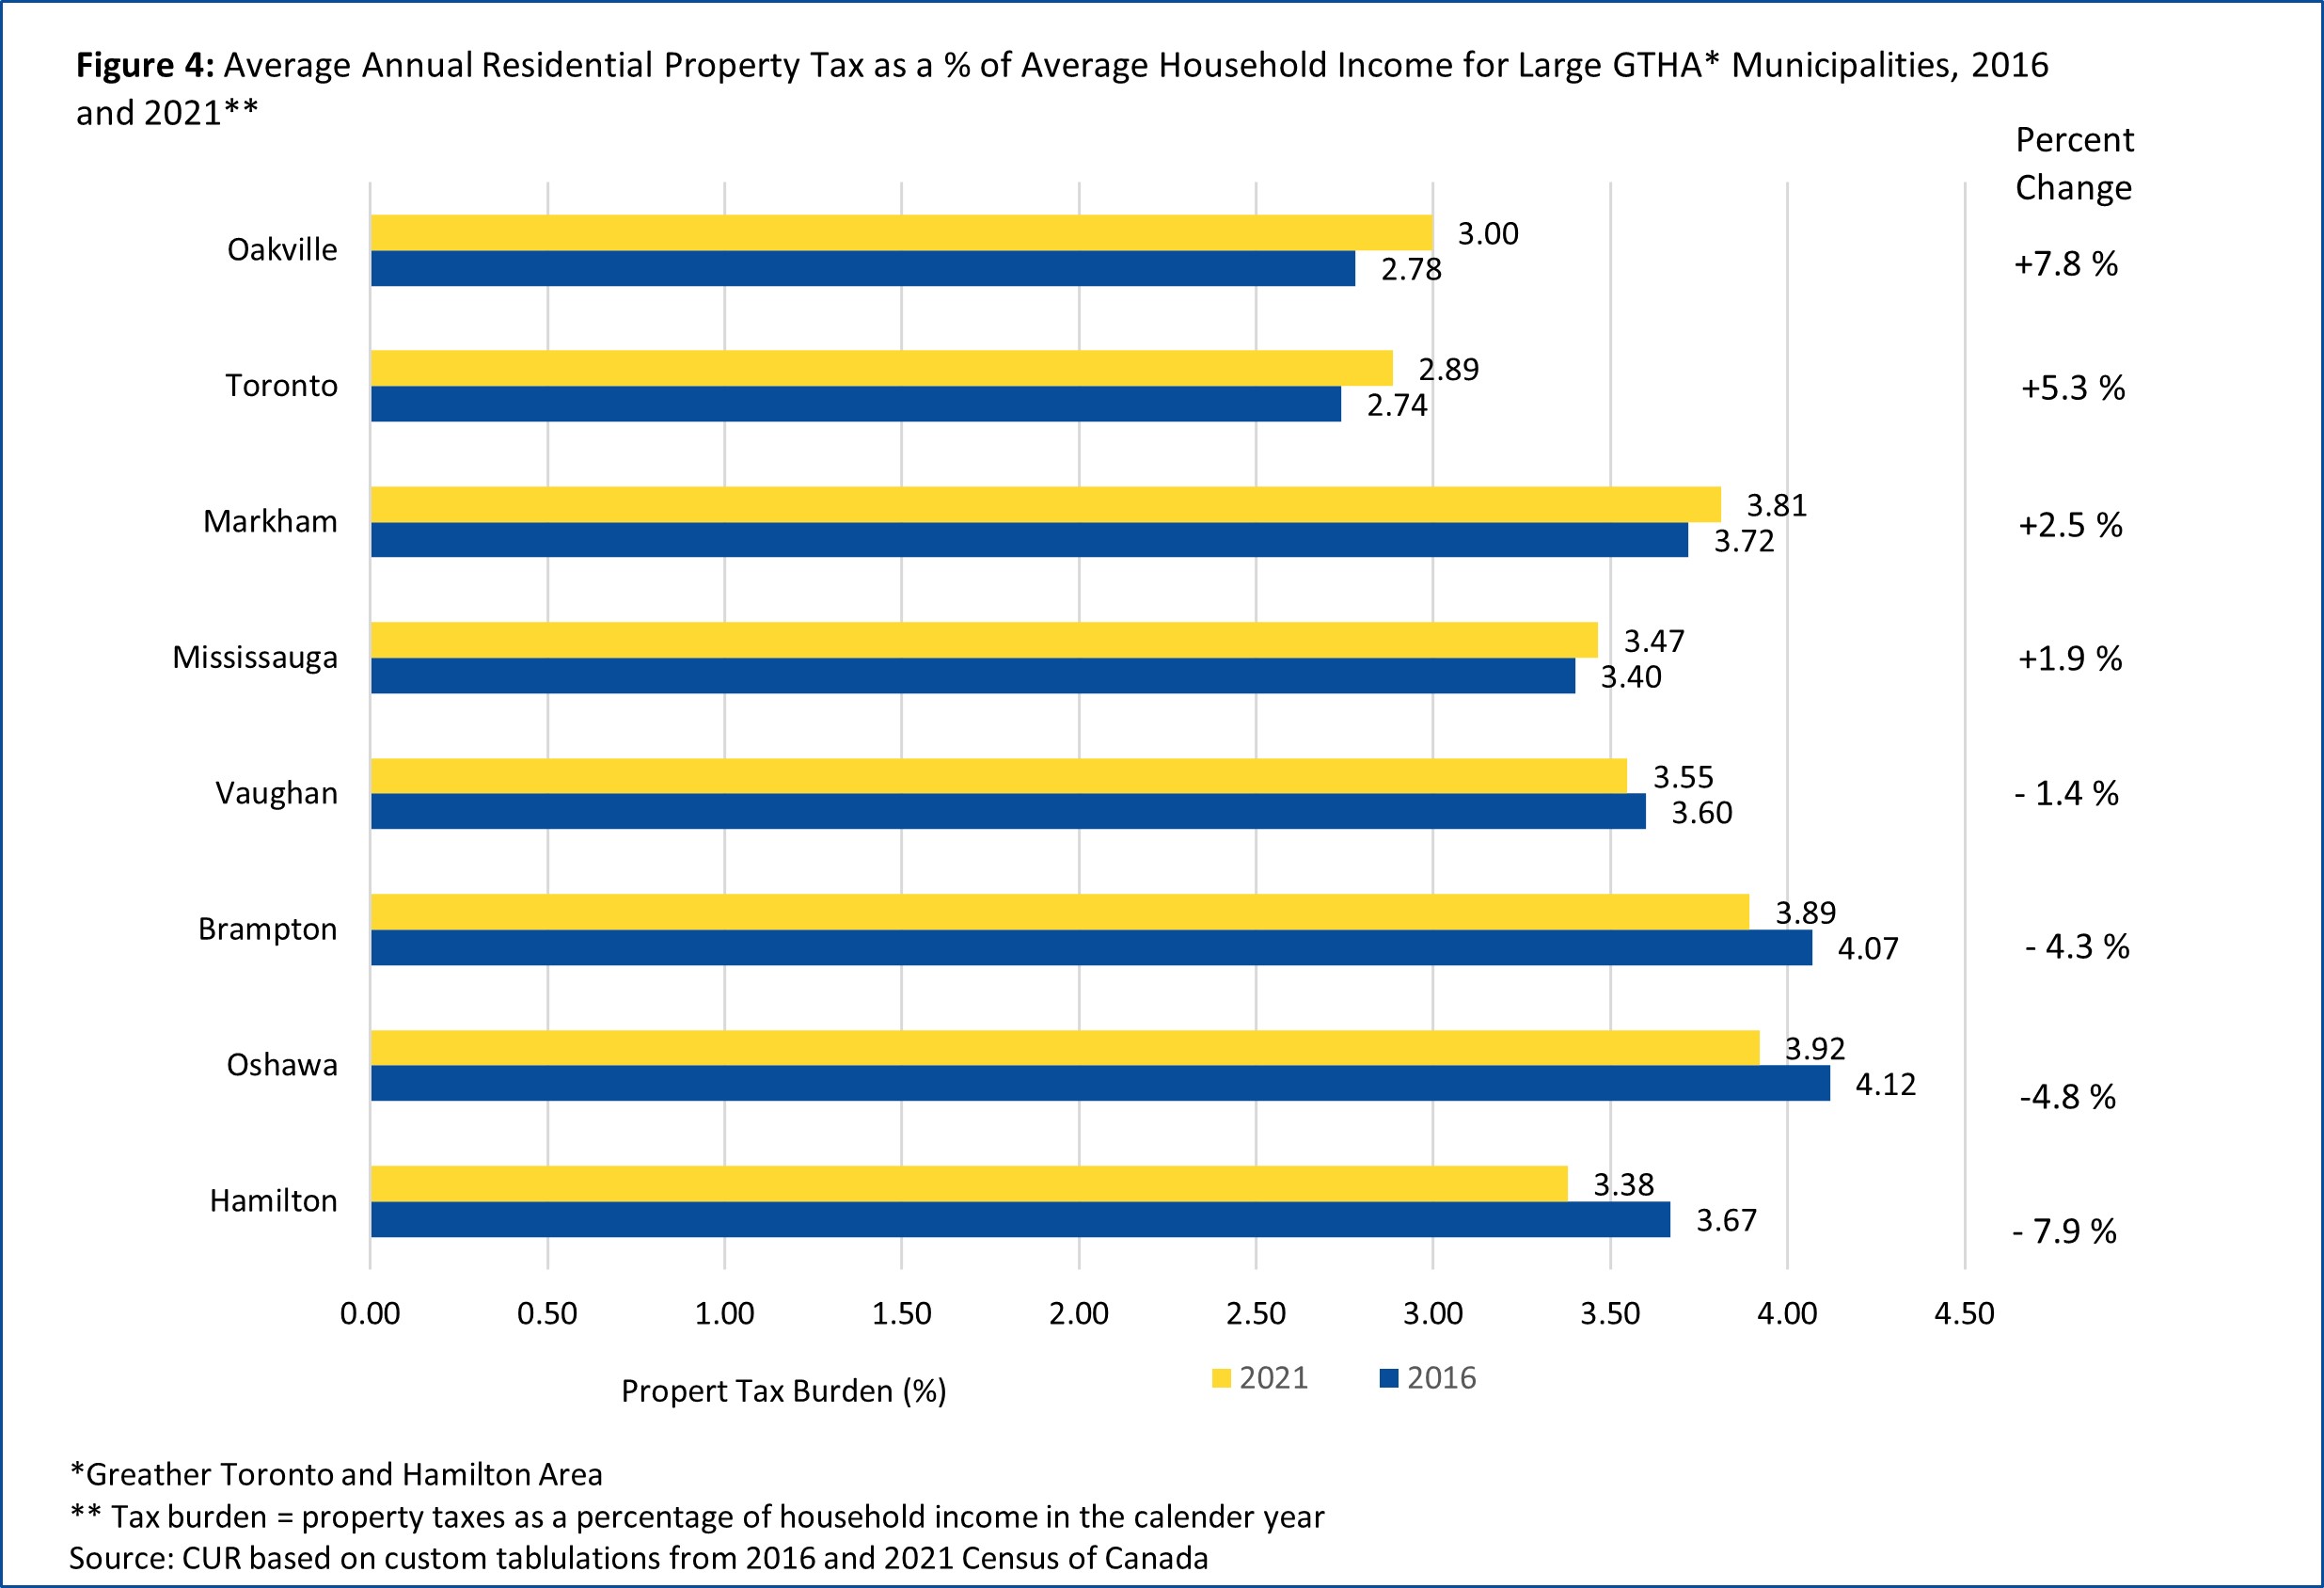 Bar Chart of the average property tax burden in Large GTHA Municipalities, 2016 and 2021. Source: TMU CUR